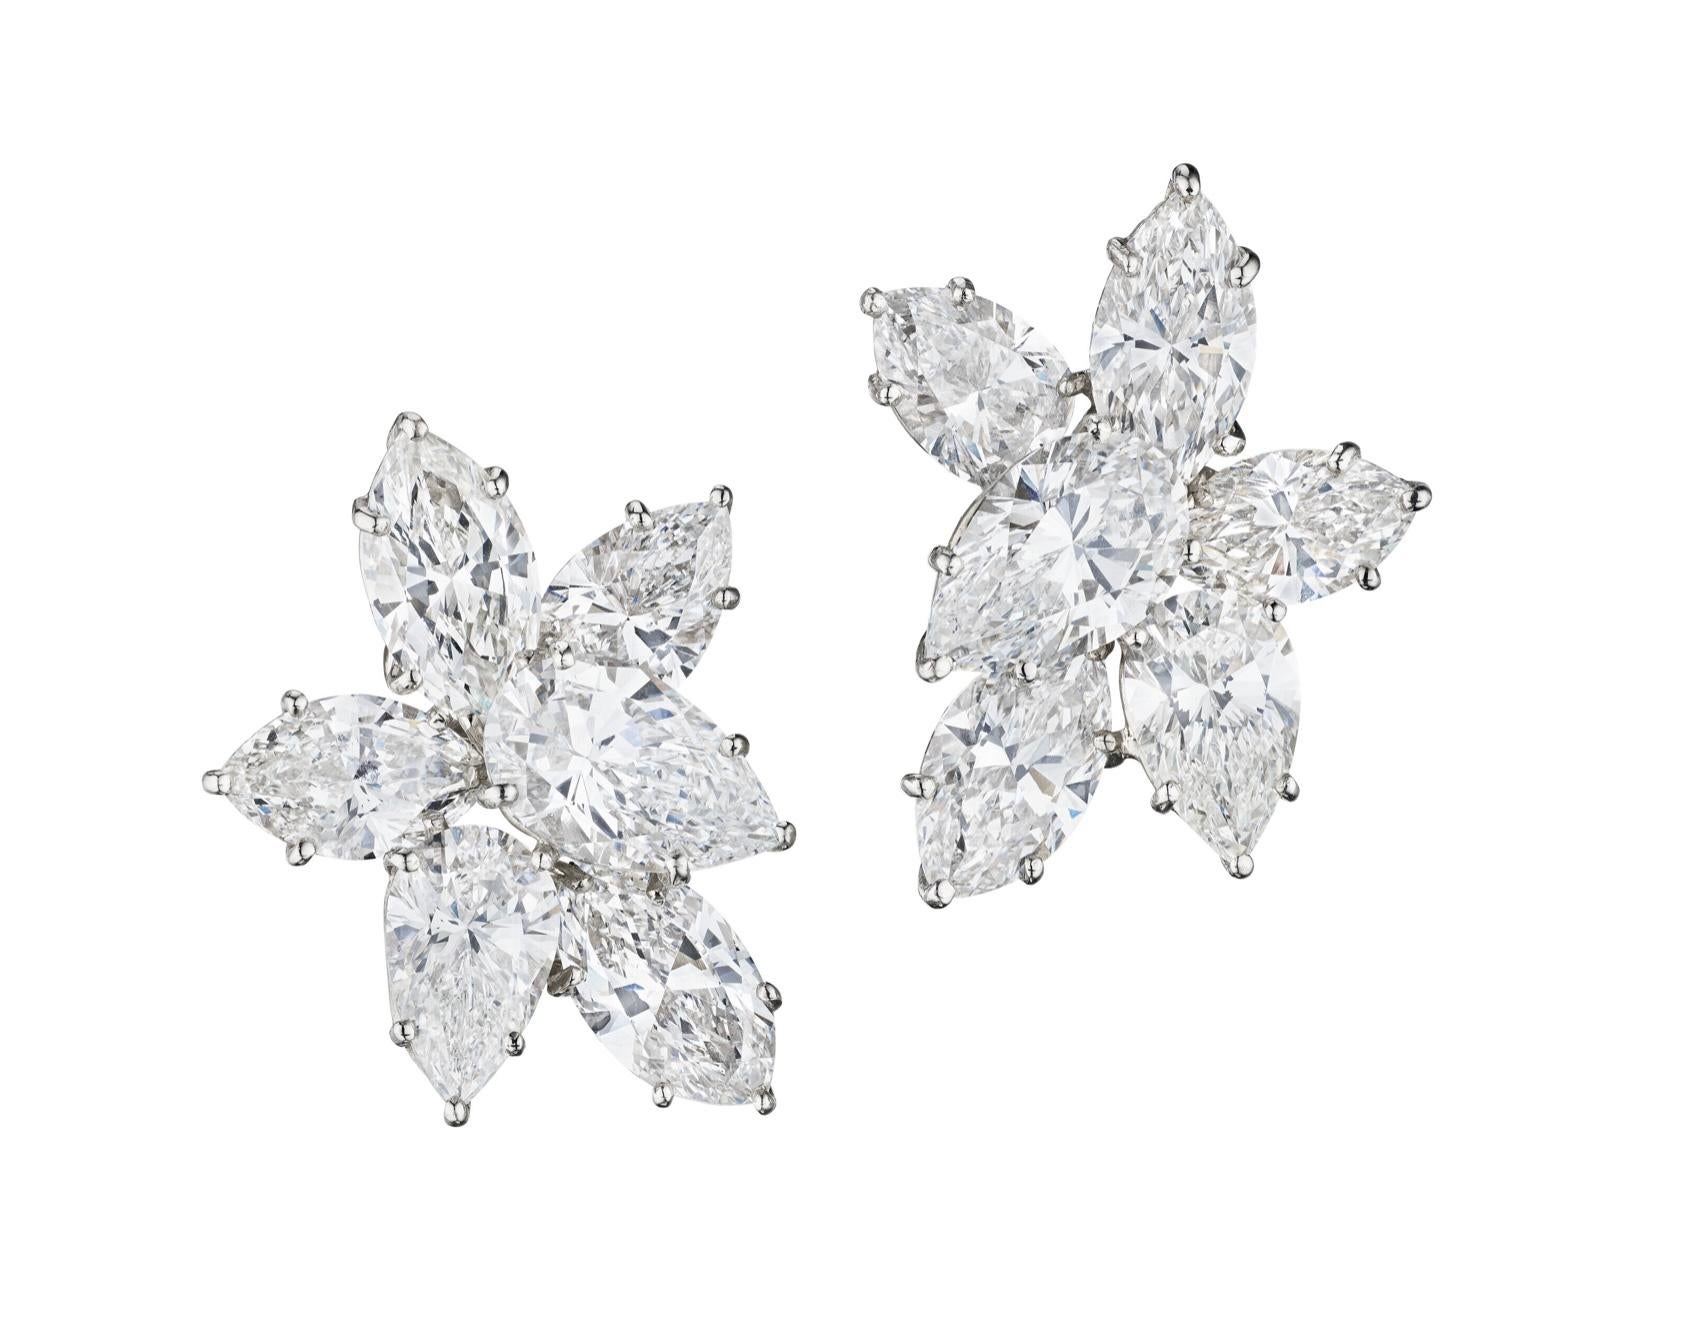 Classic, Harry Winston Diamond Cluster Earrings.
 This timeless and elegant pair of earrings has 6 marquise cut diamonds weighing a total of 5.77 carats (Color: E-F, Clarity: VVS1- VS1 GIA certified)
 and 6 pear shape diamonds weighing a total of